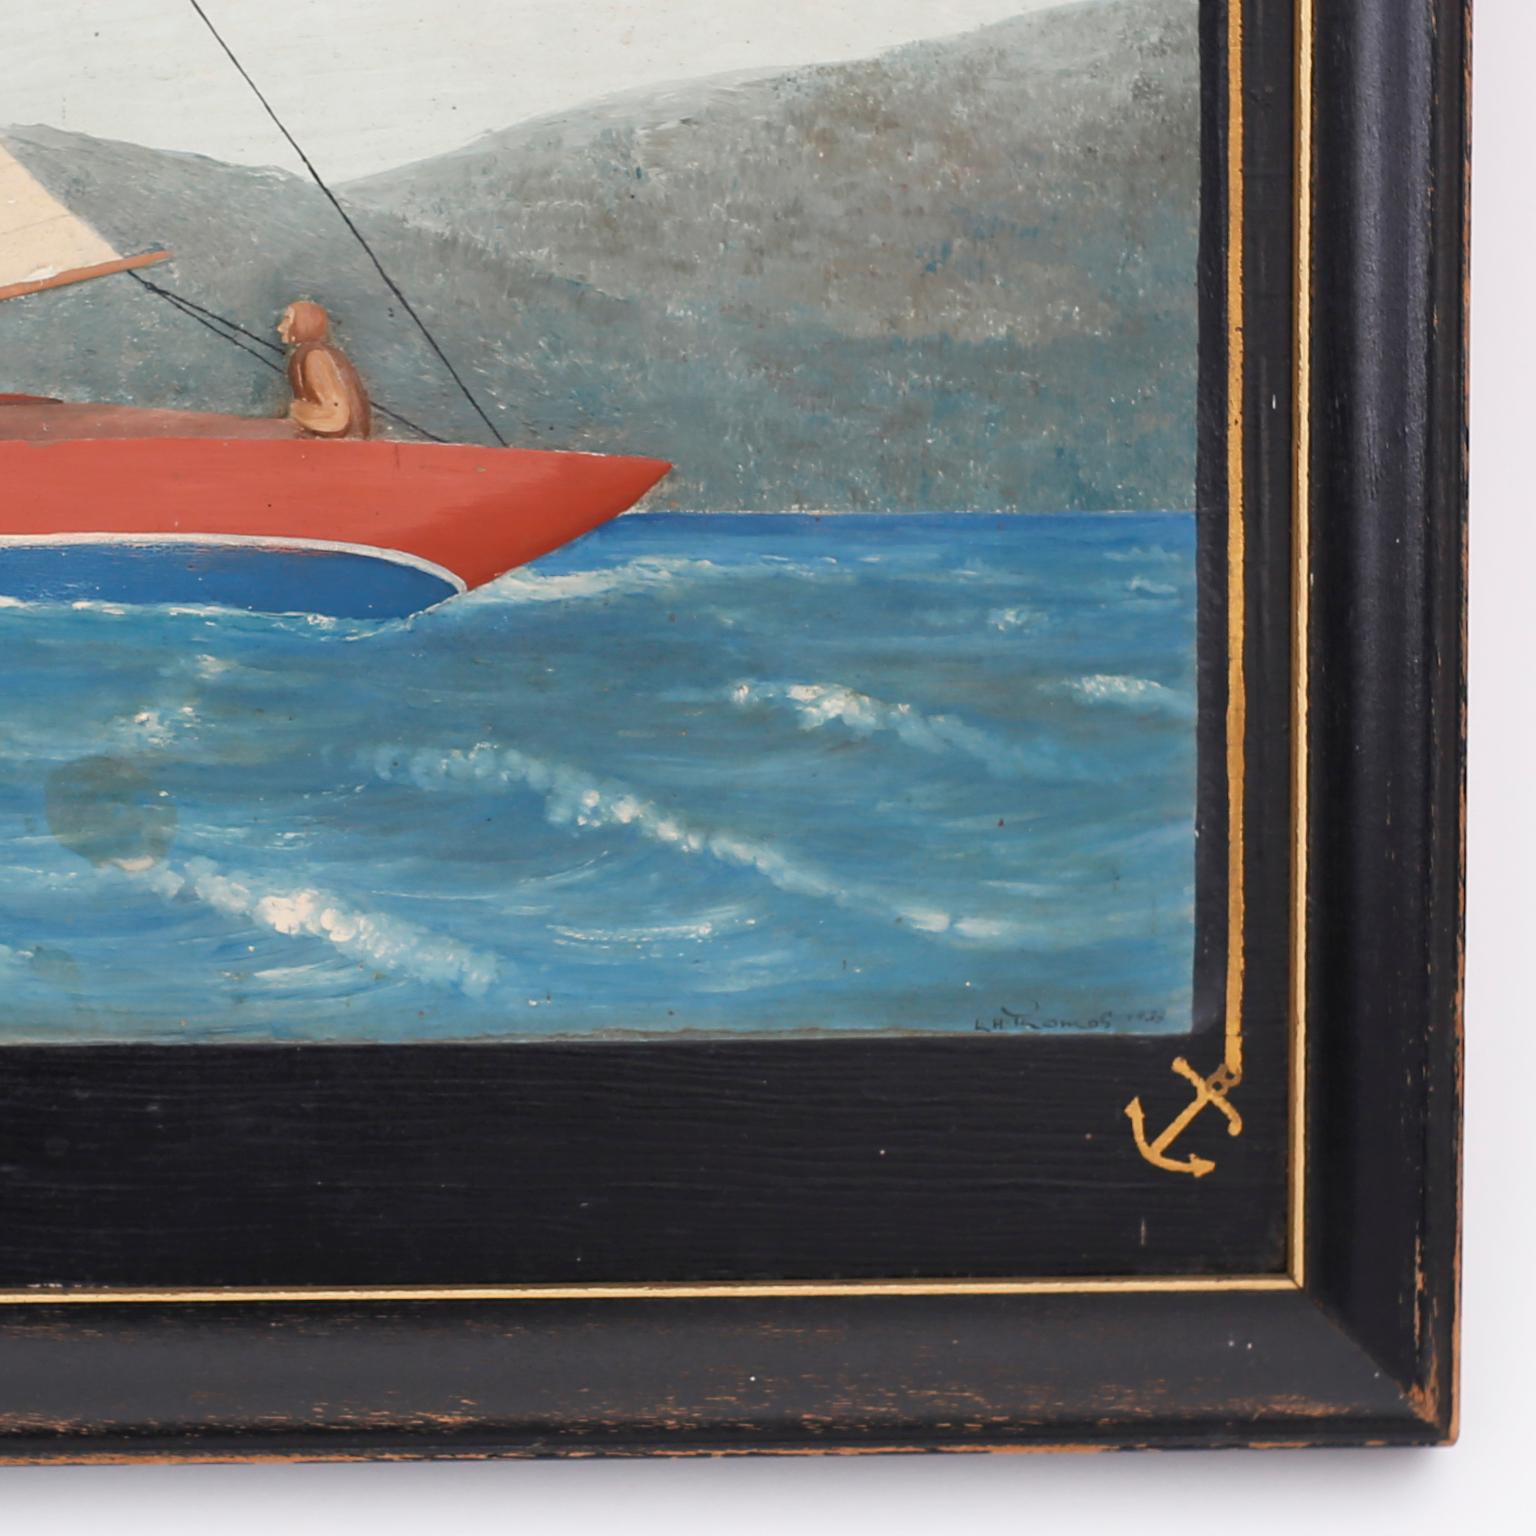 American Diorama of a Sailboat on a Lake, Dated 1933